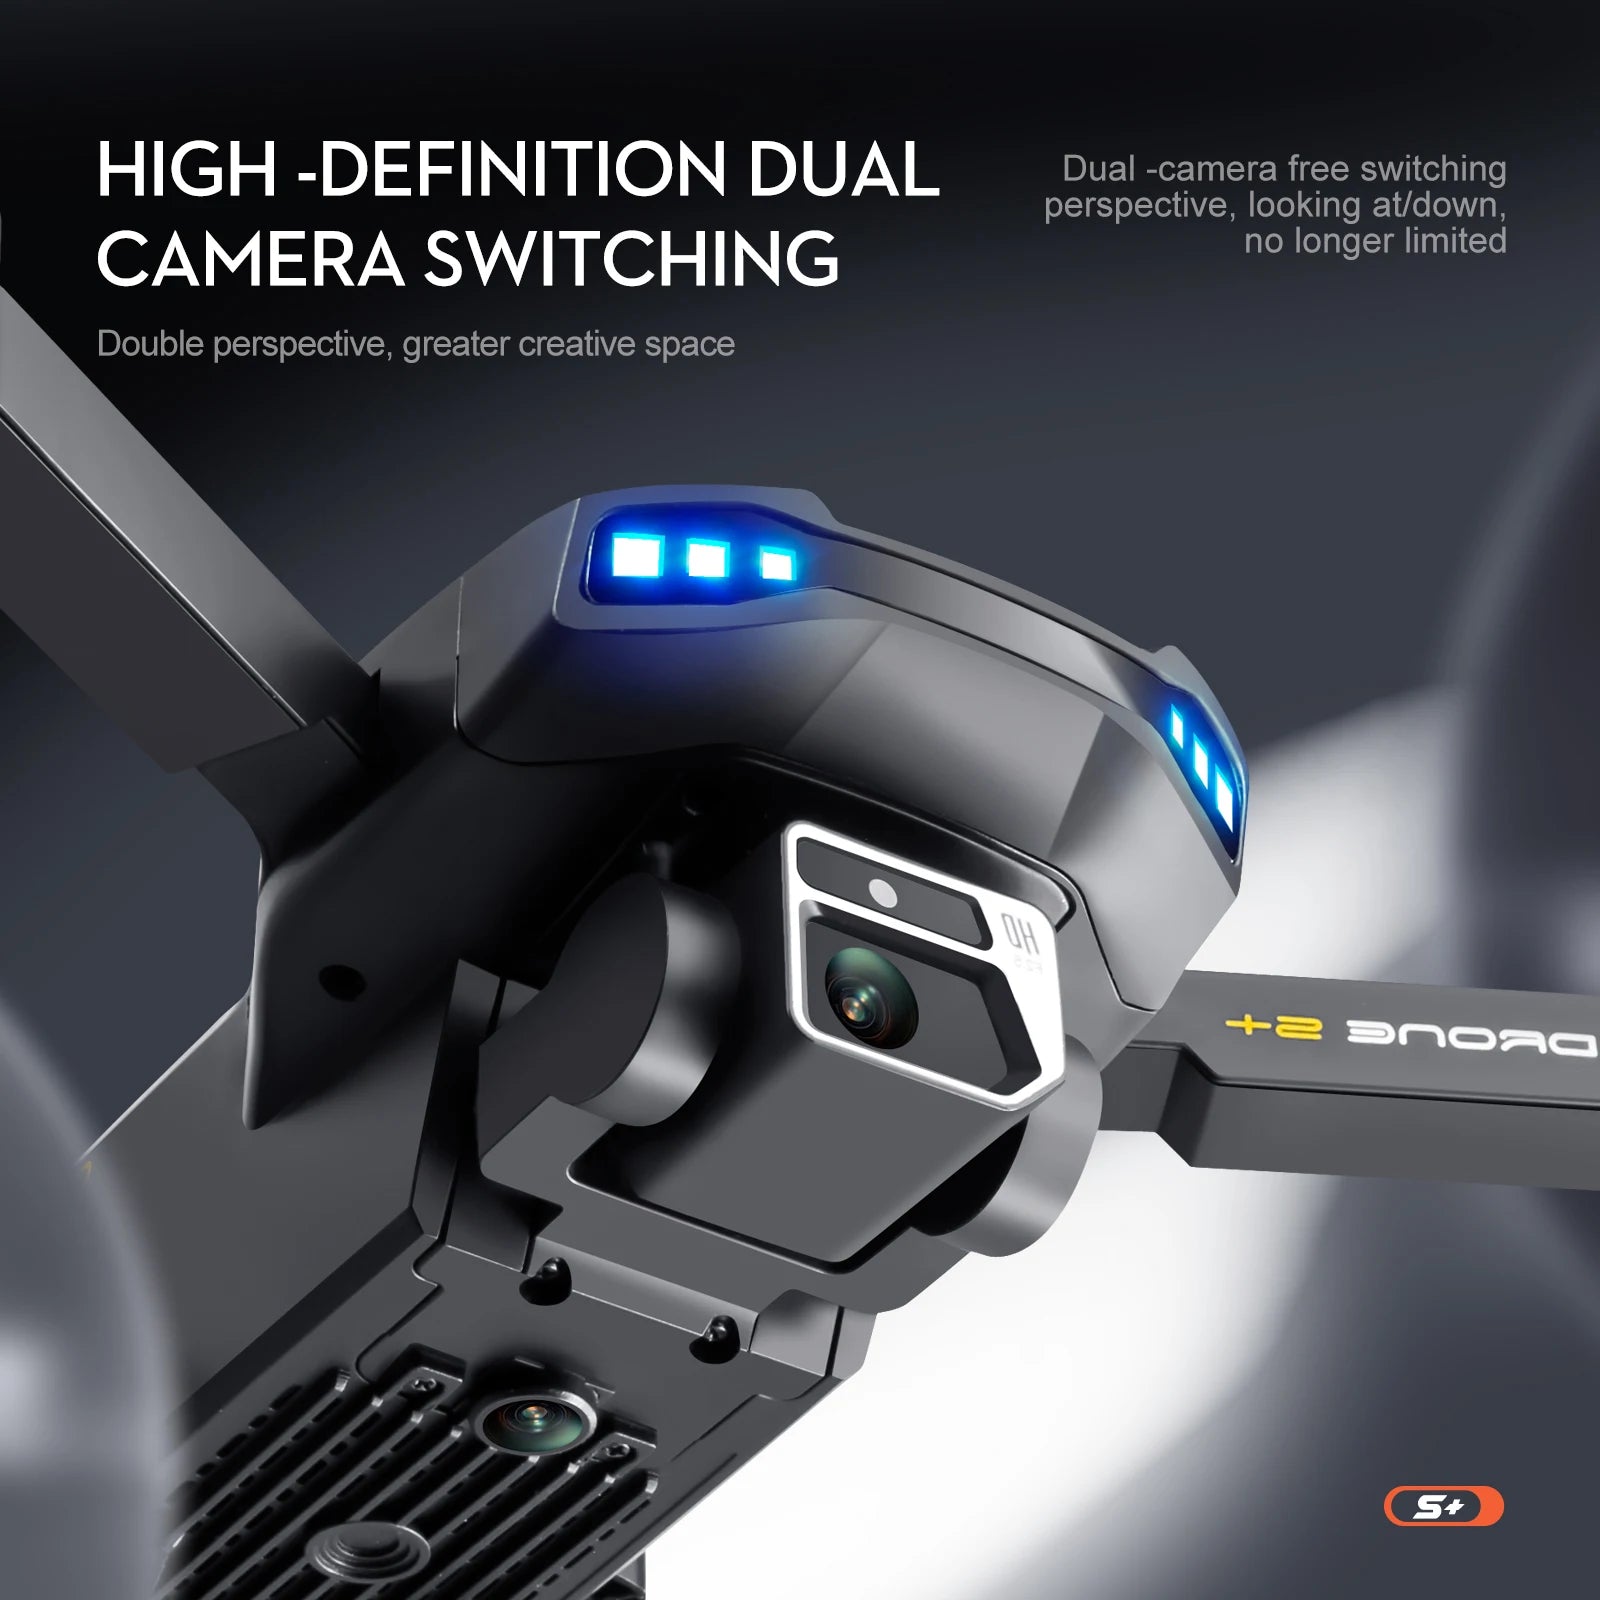 S+ GPS Drone, HIGH -DEFINITION DUAL Dual -camera free switching perspective, looking